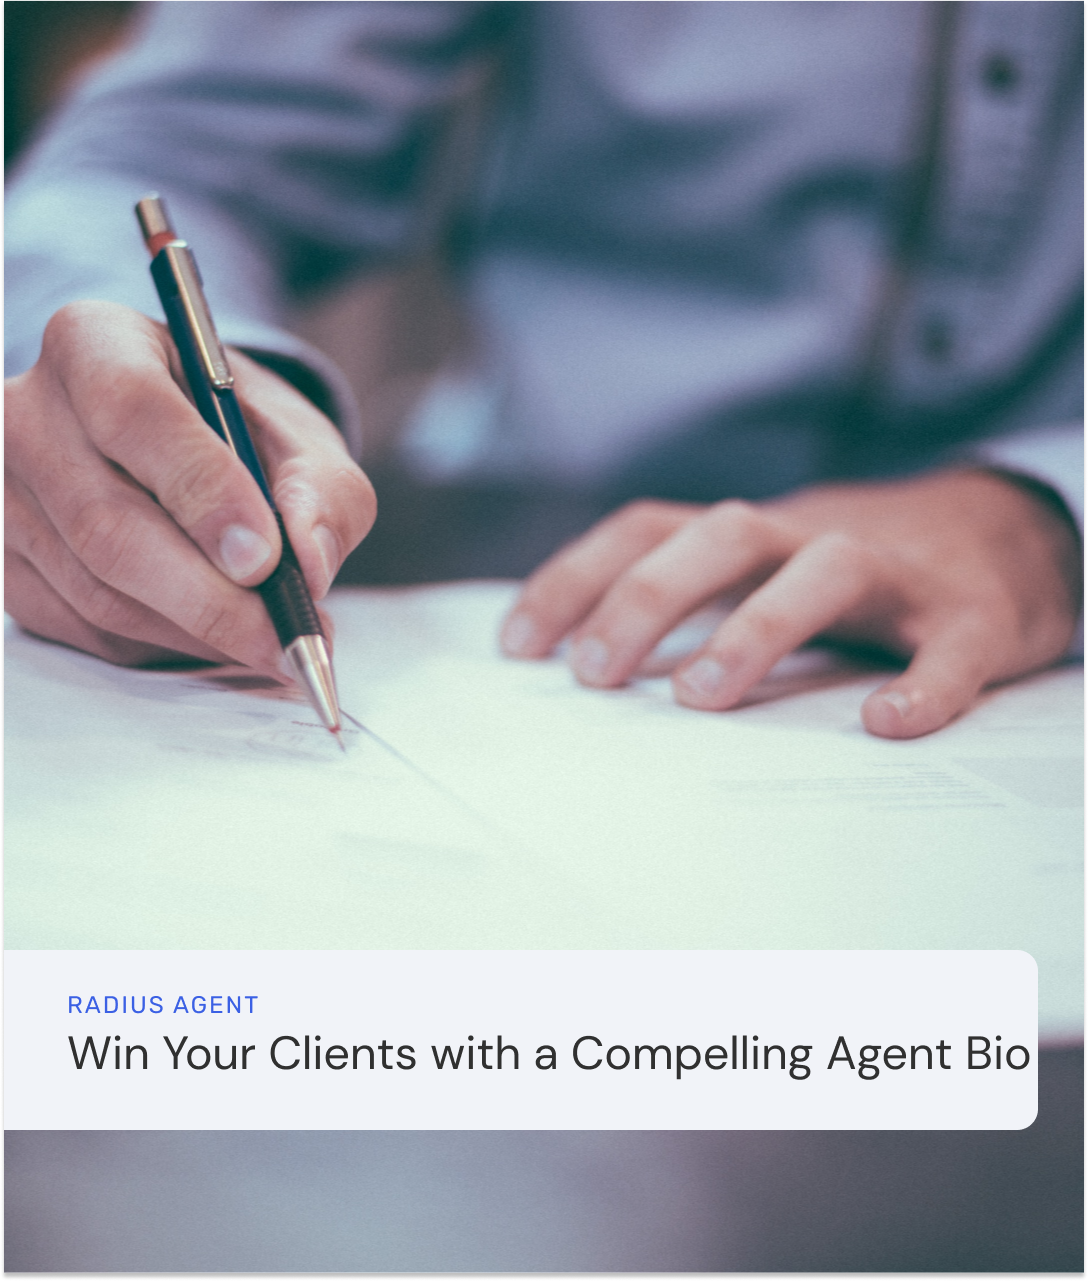 Win Your Clients with a Compelling Agent Bio